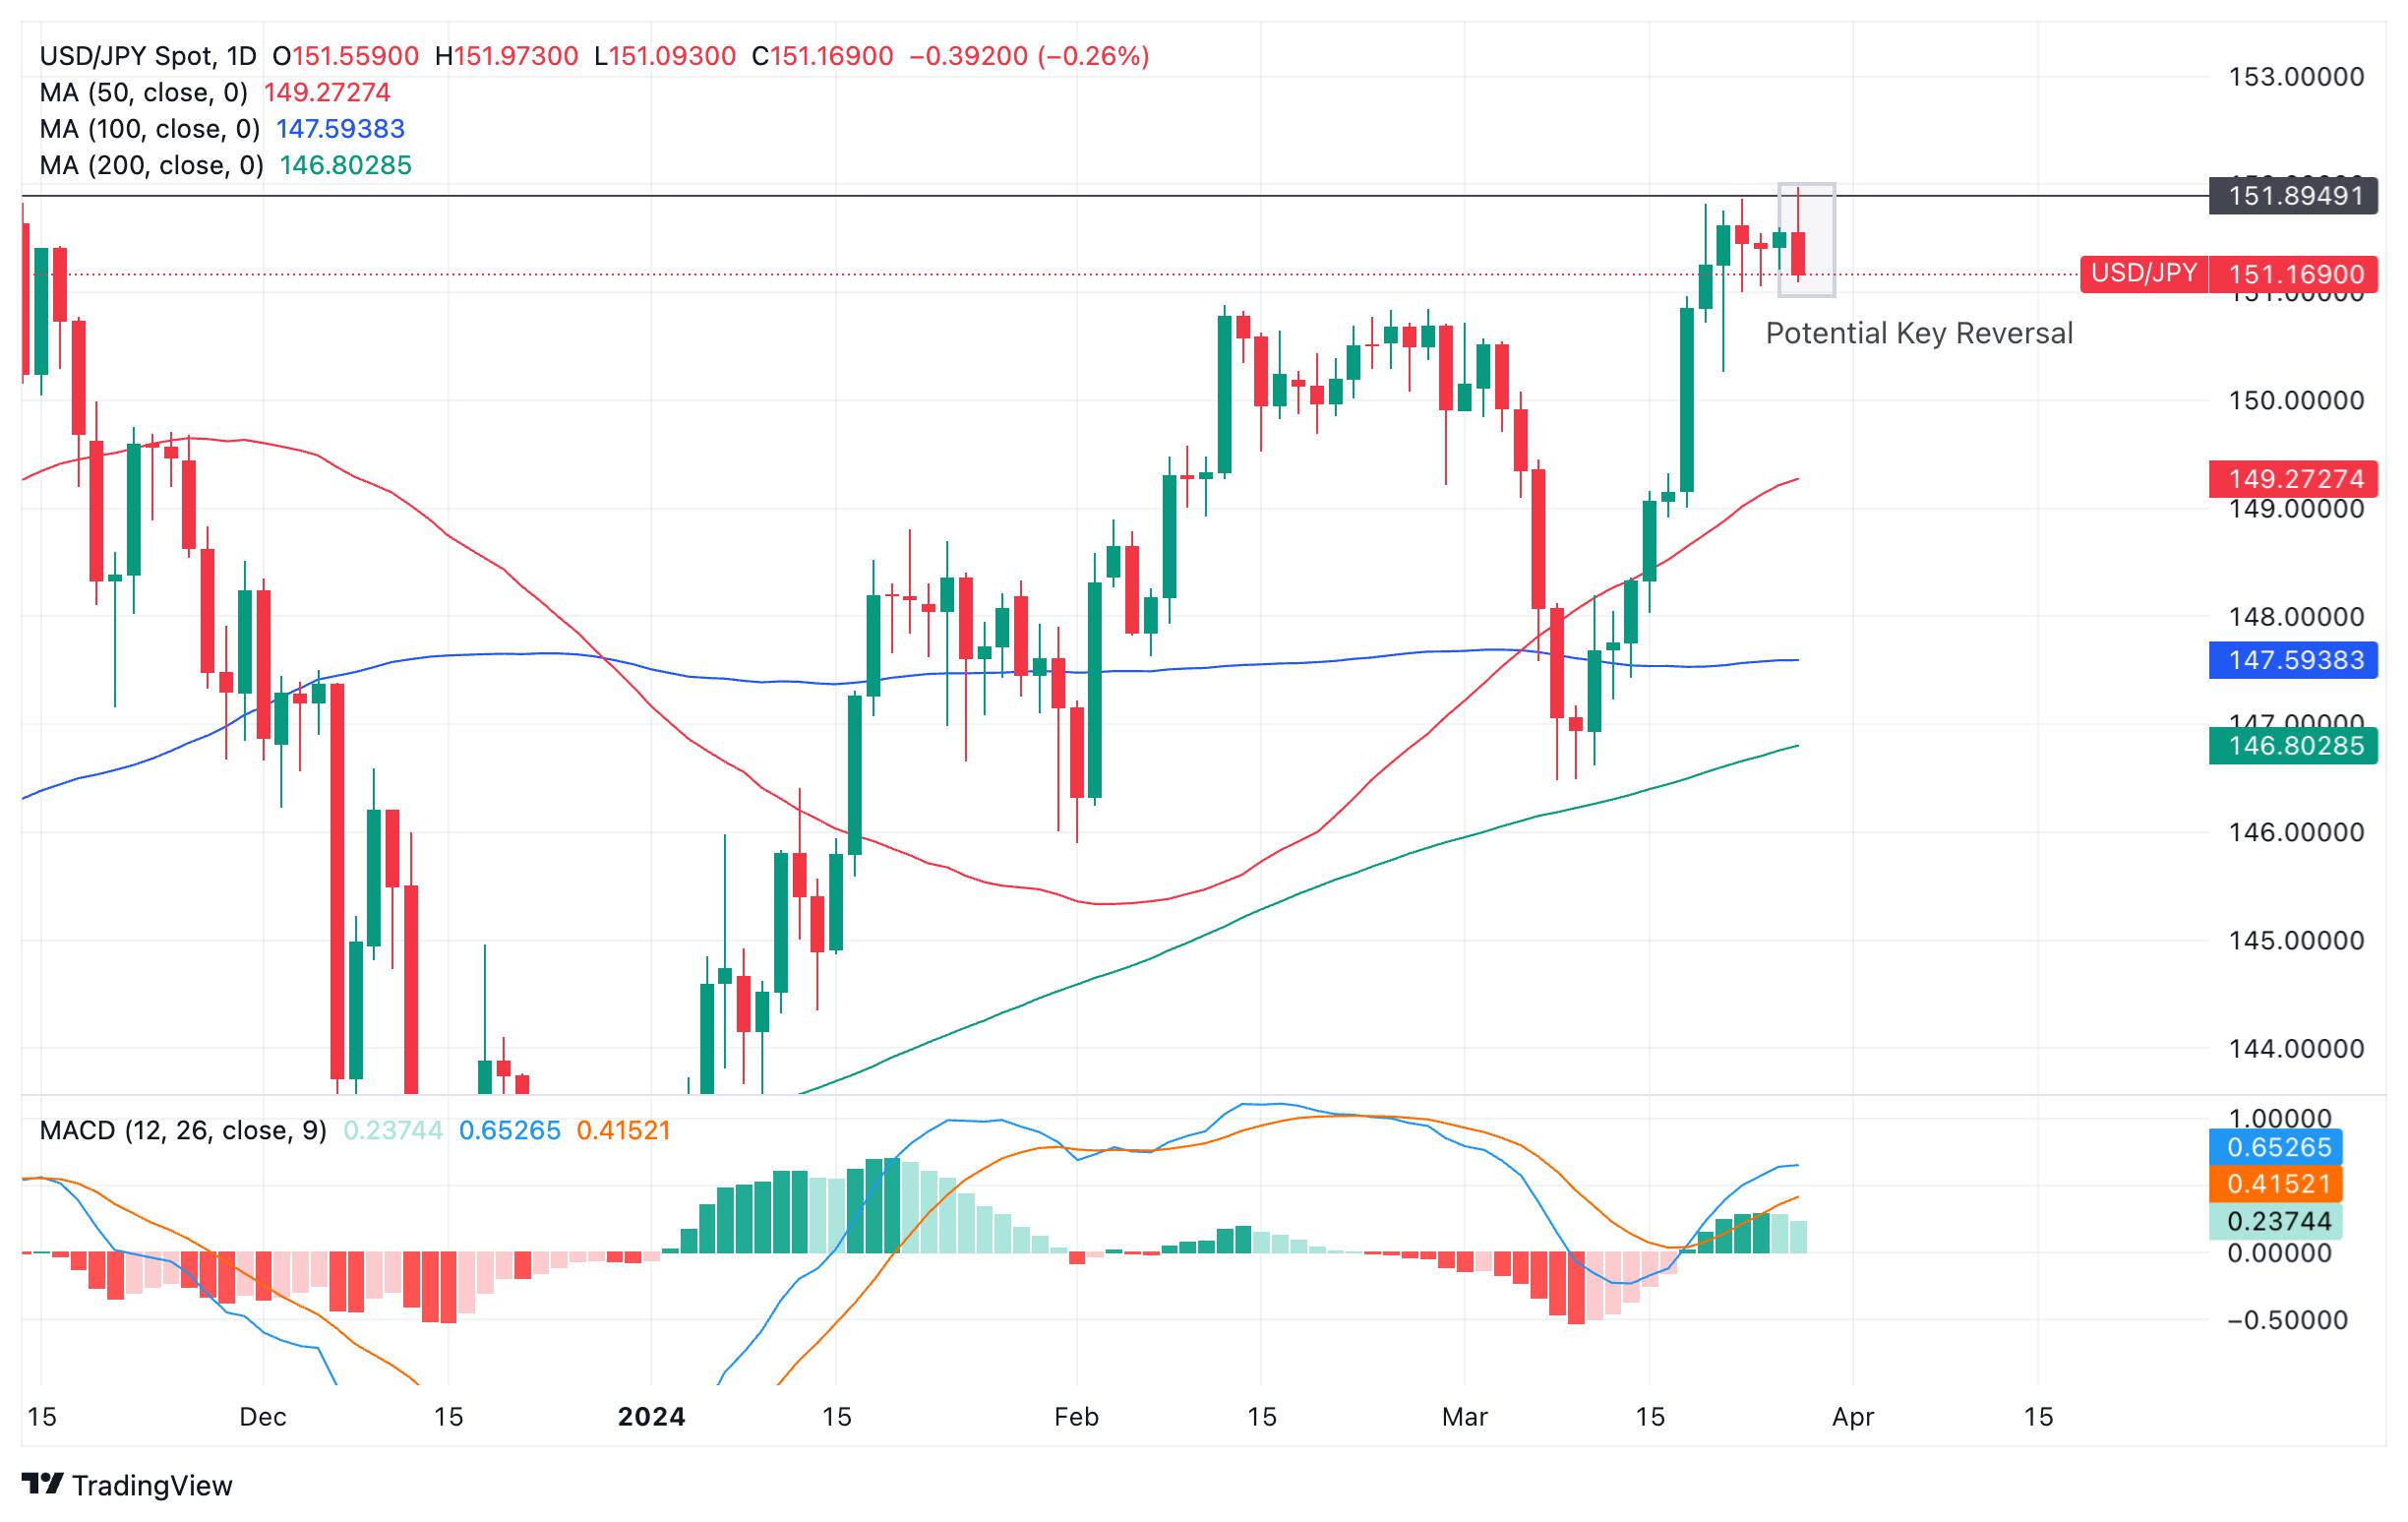 USD/JPY Price Analysis: Possibility of Key Reversal Day forming